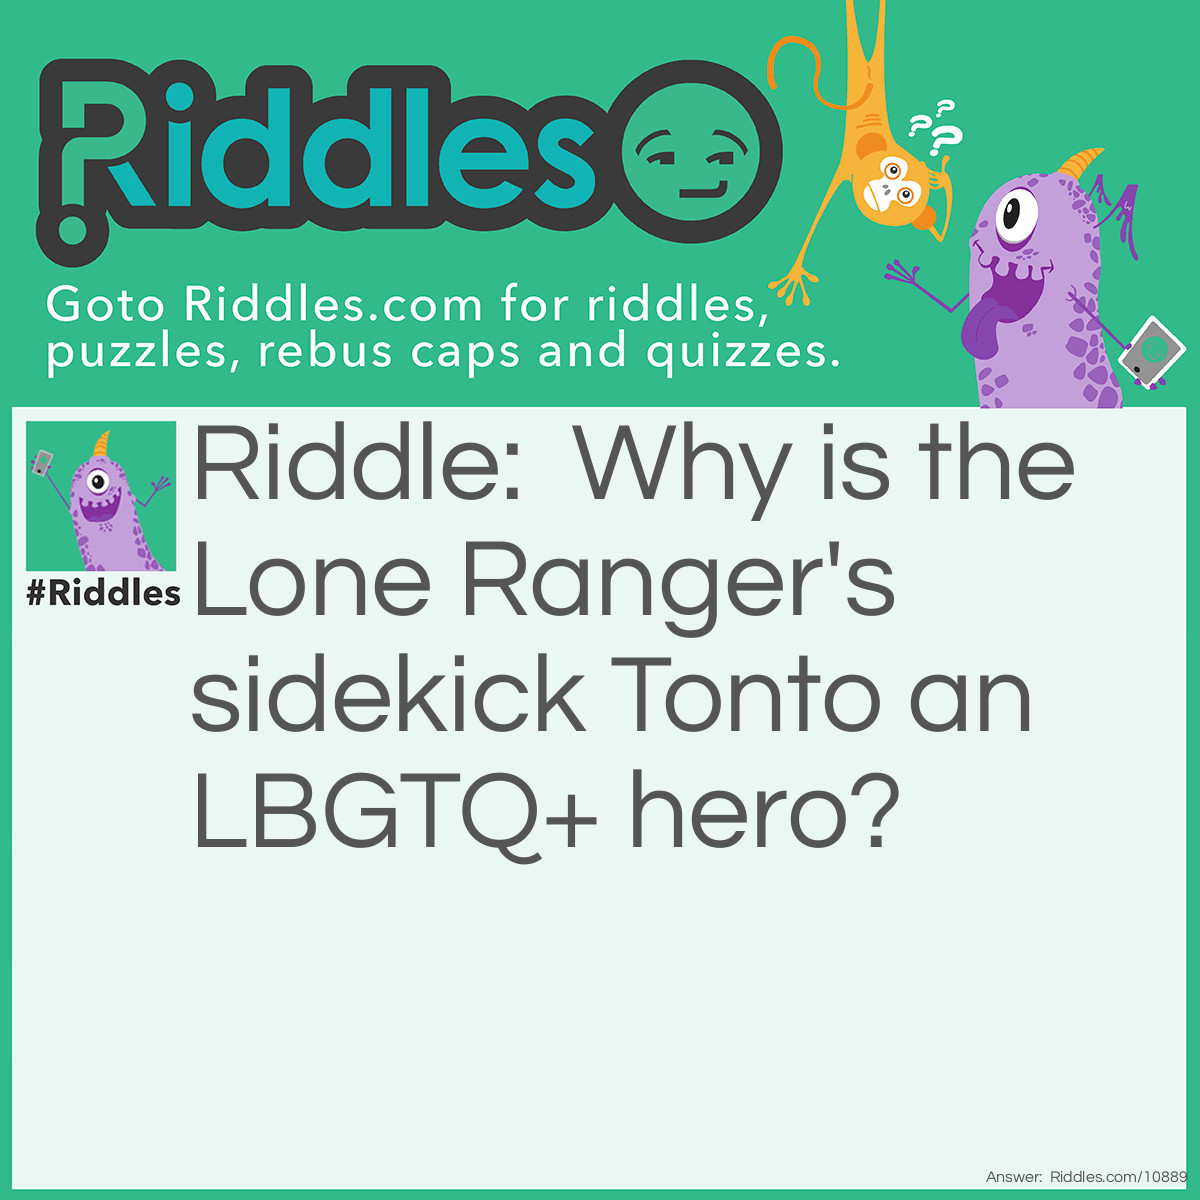 Riddle: Why is the Lone Ranger's sidekick Tonto an LBGTQ+ hero? Answer: Him first choose own pronouns.